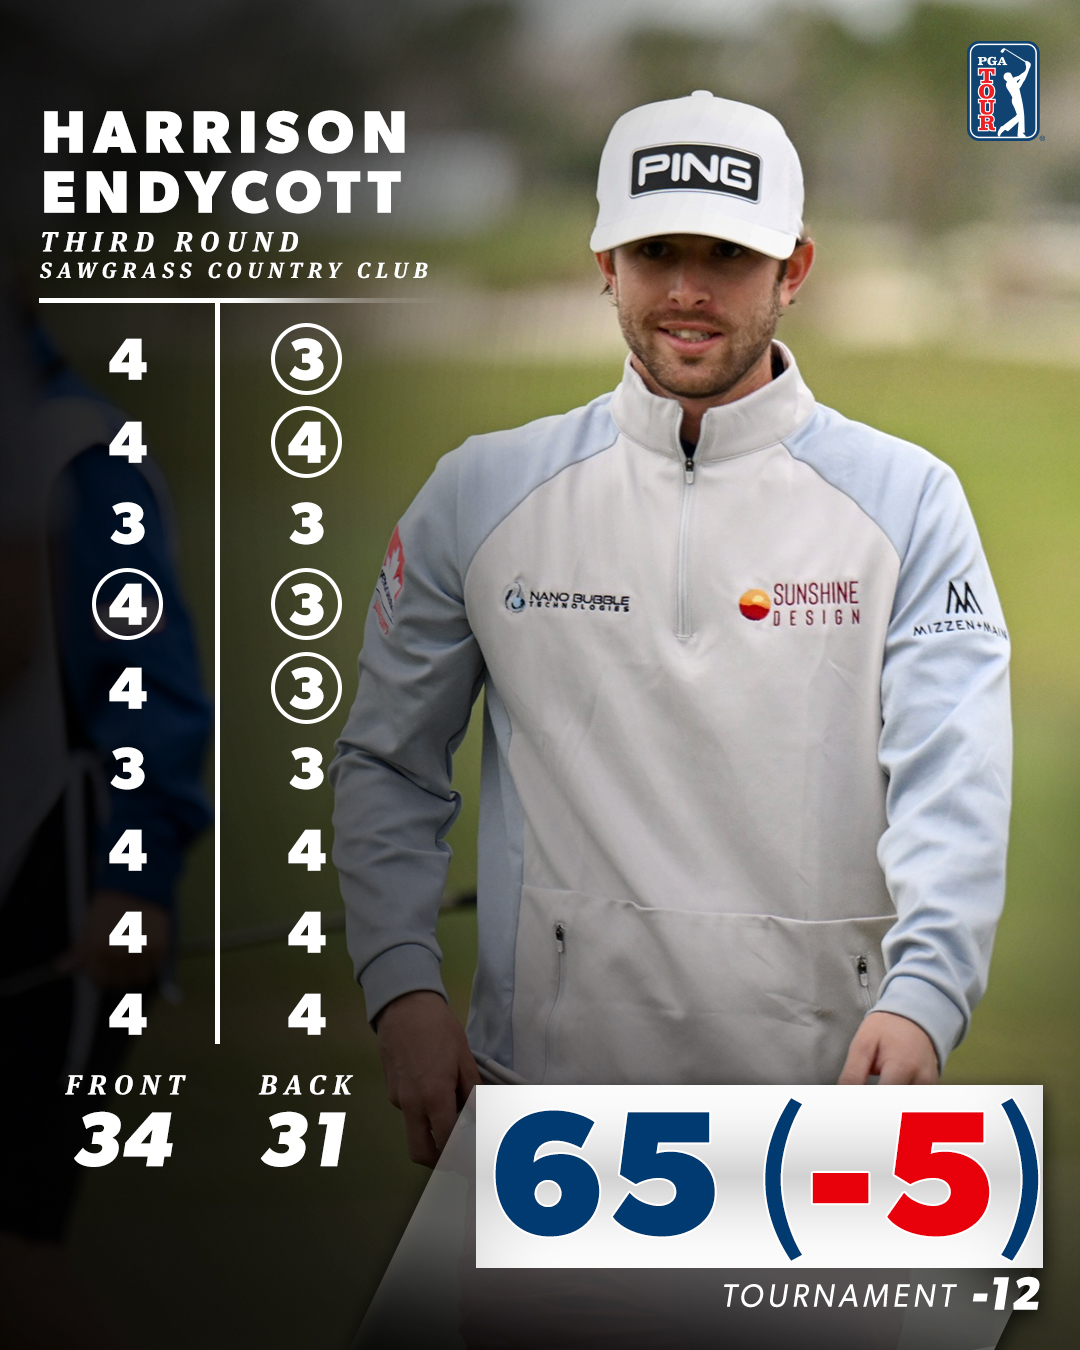 PGA TOUR on X: A strong Saturday for @HarrisonEndy96 💪 He leads